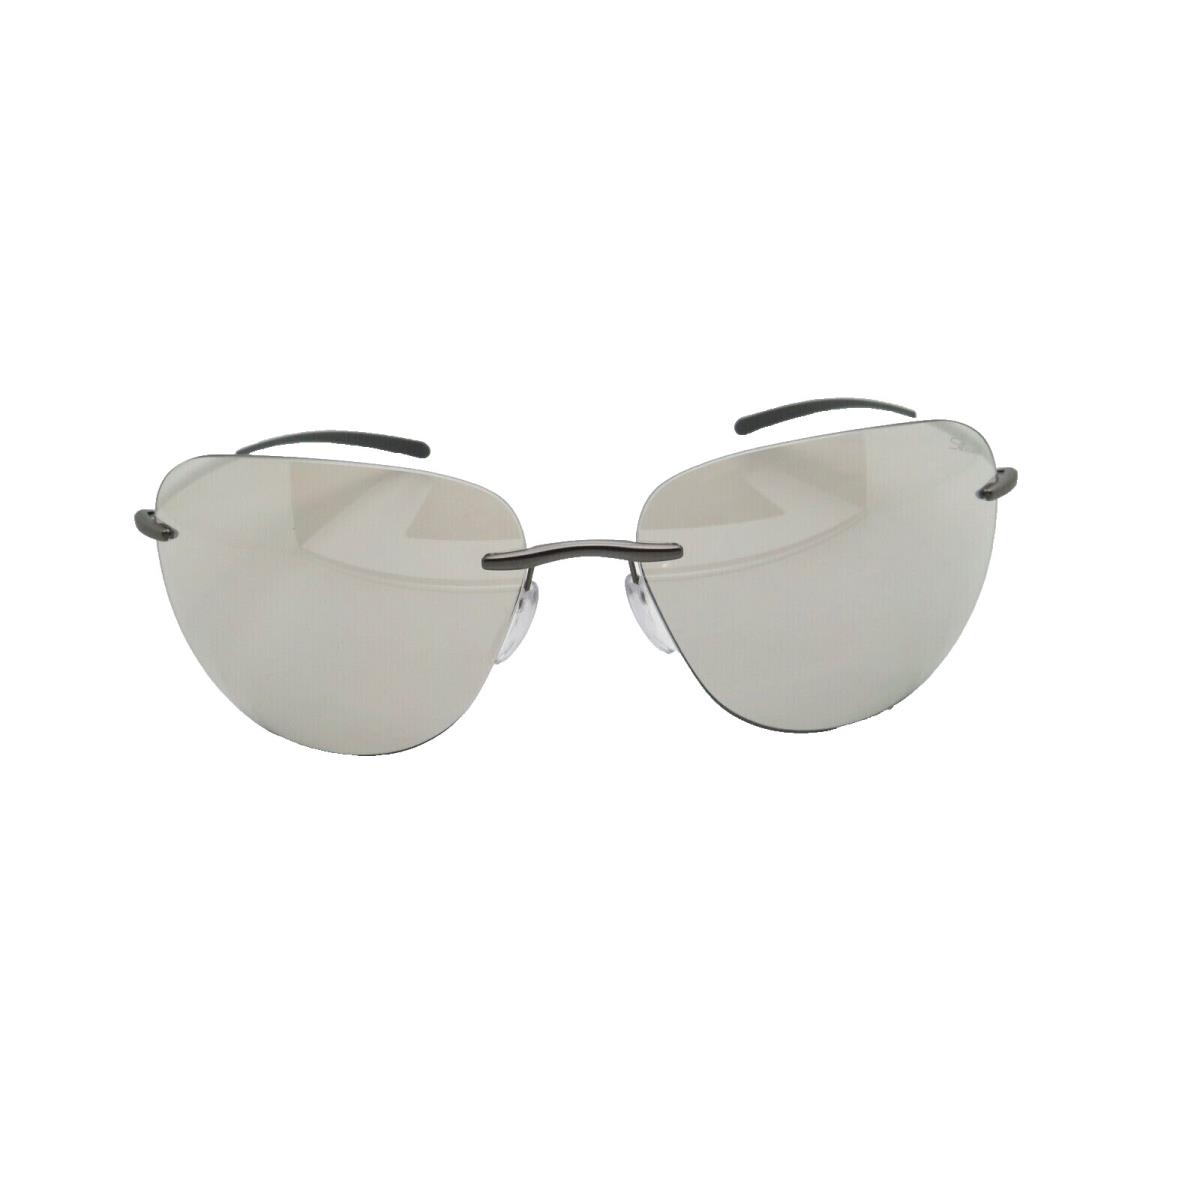 Silhouette Bayside 8729 White Cool Grey/light Q Grey Mirrored 7110 Sunglasses - Frame: White Cool Grey, Lens: Light Q Grey Mirrored